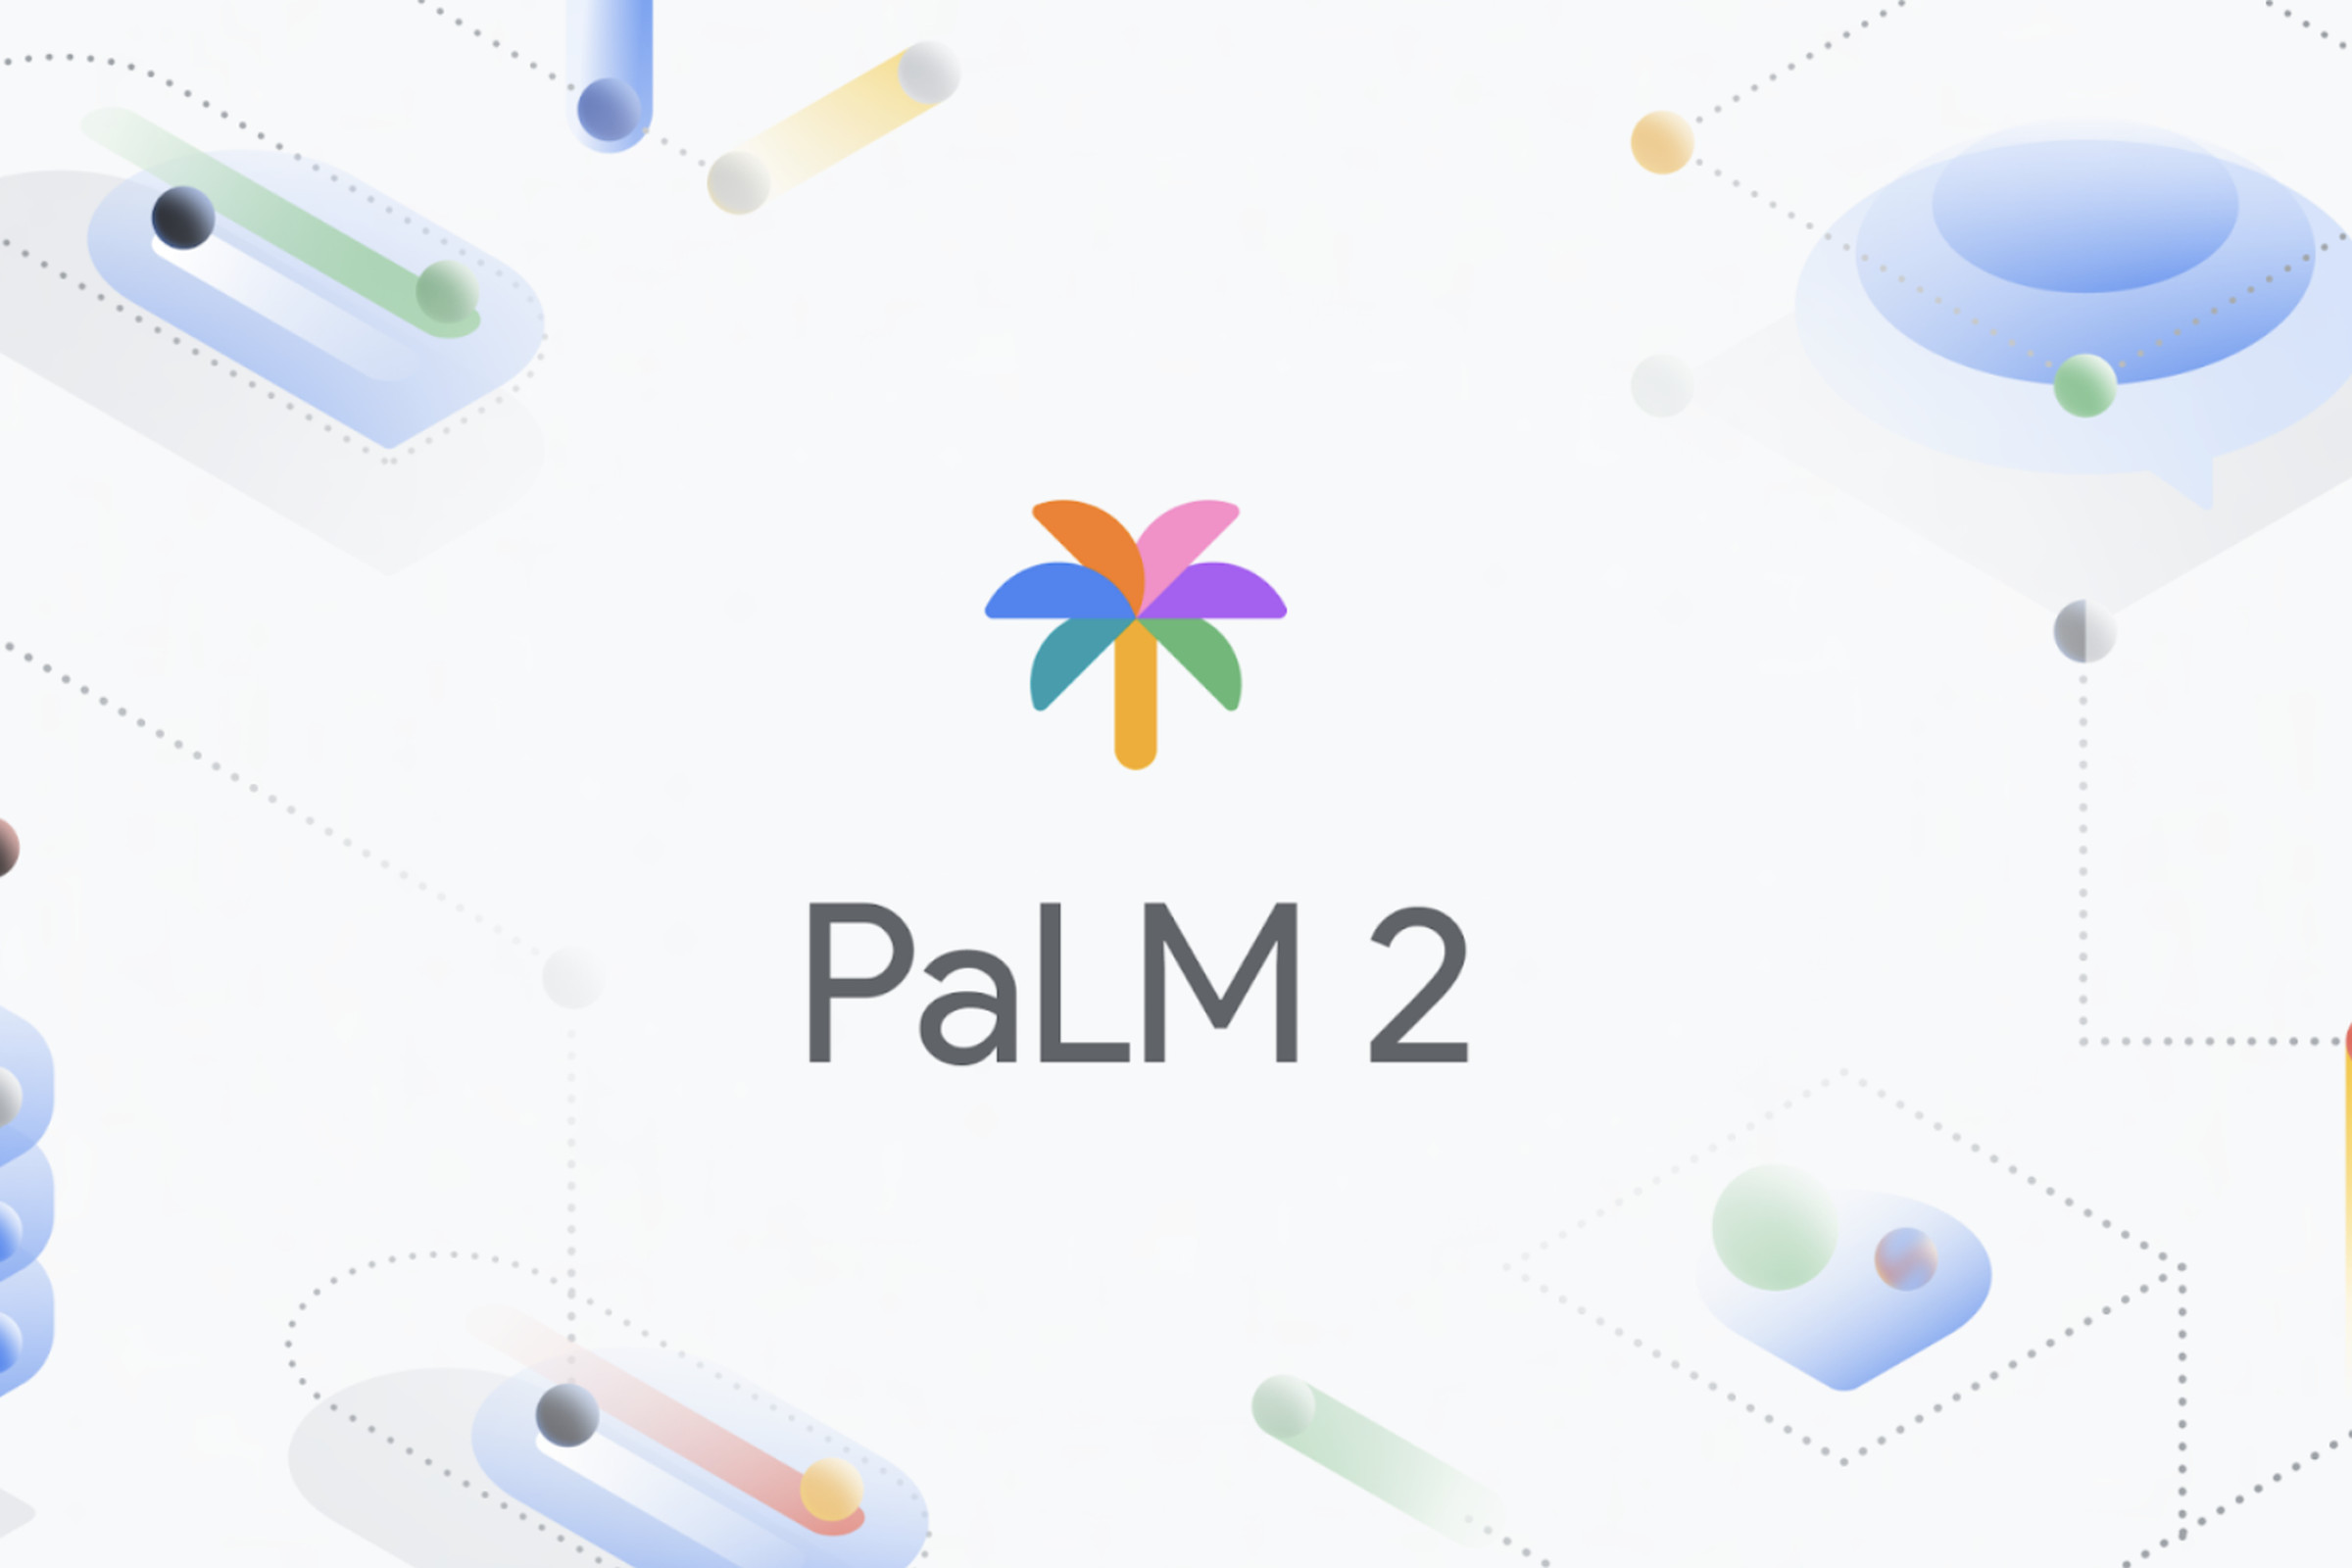 An illustration of Google’s PaLM 2 logo, which looks like a palm tree.